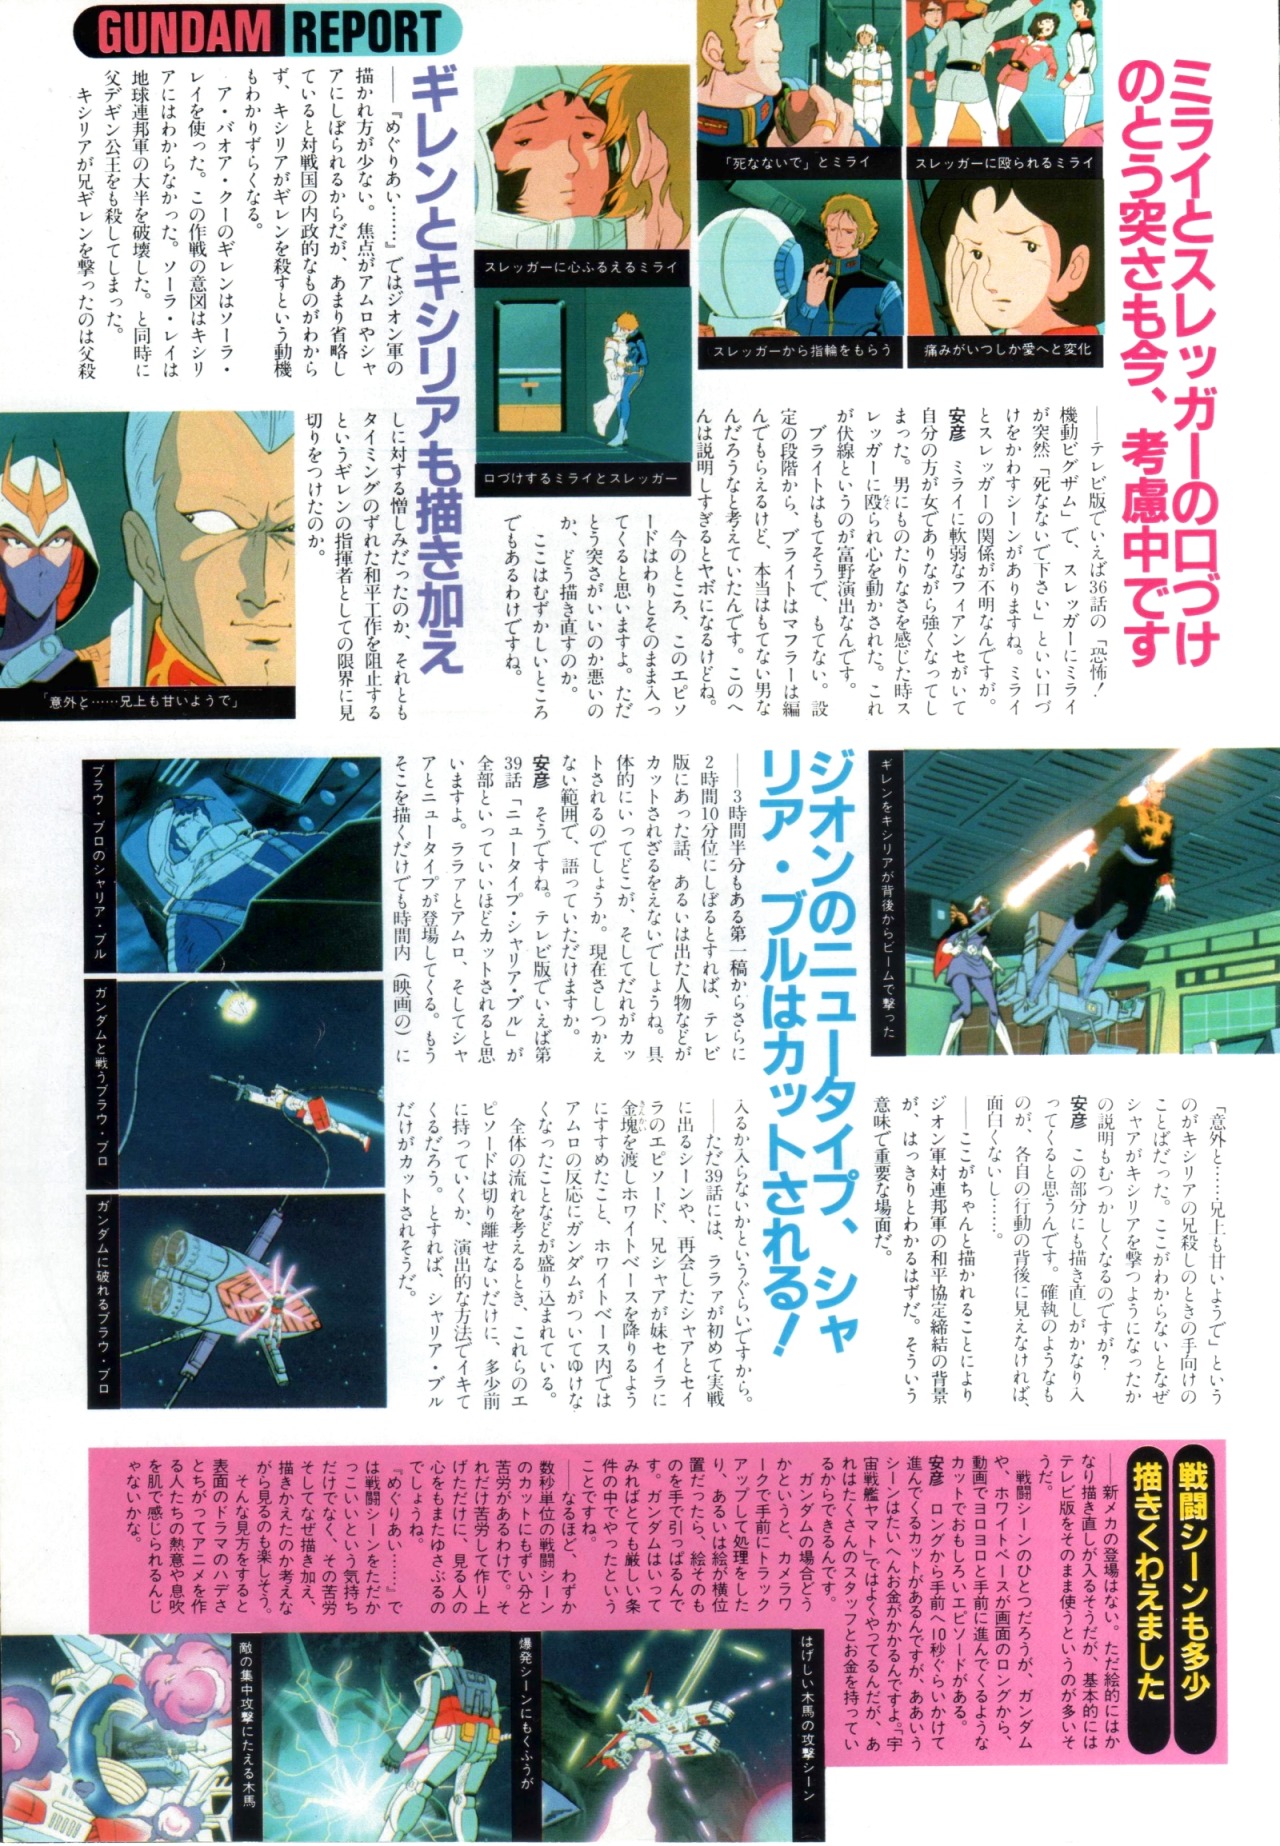 Anim Archive Mobile Suit Gundam Movie Interview With